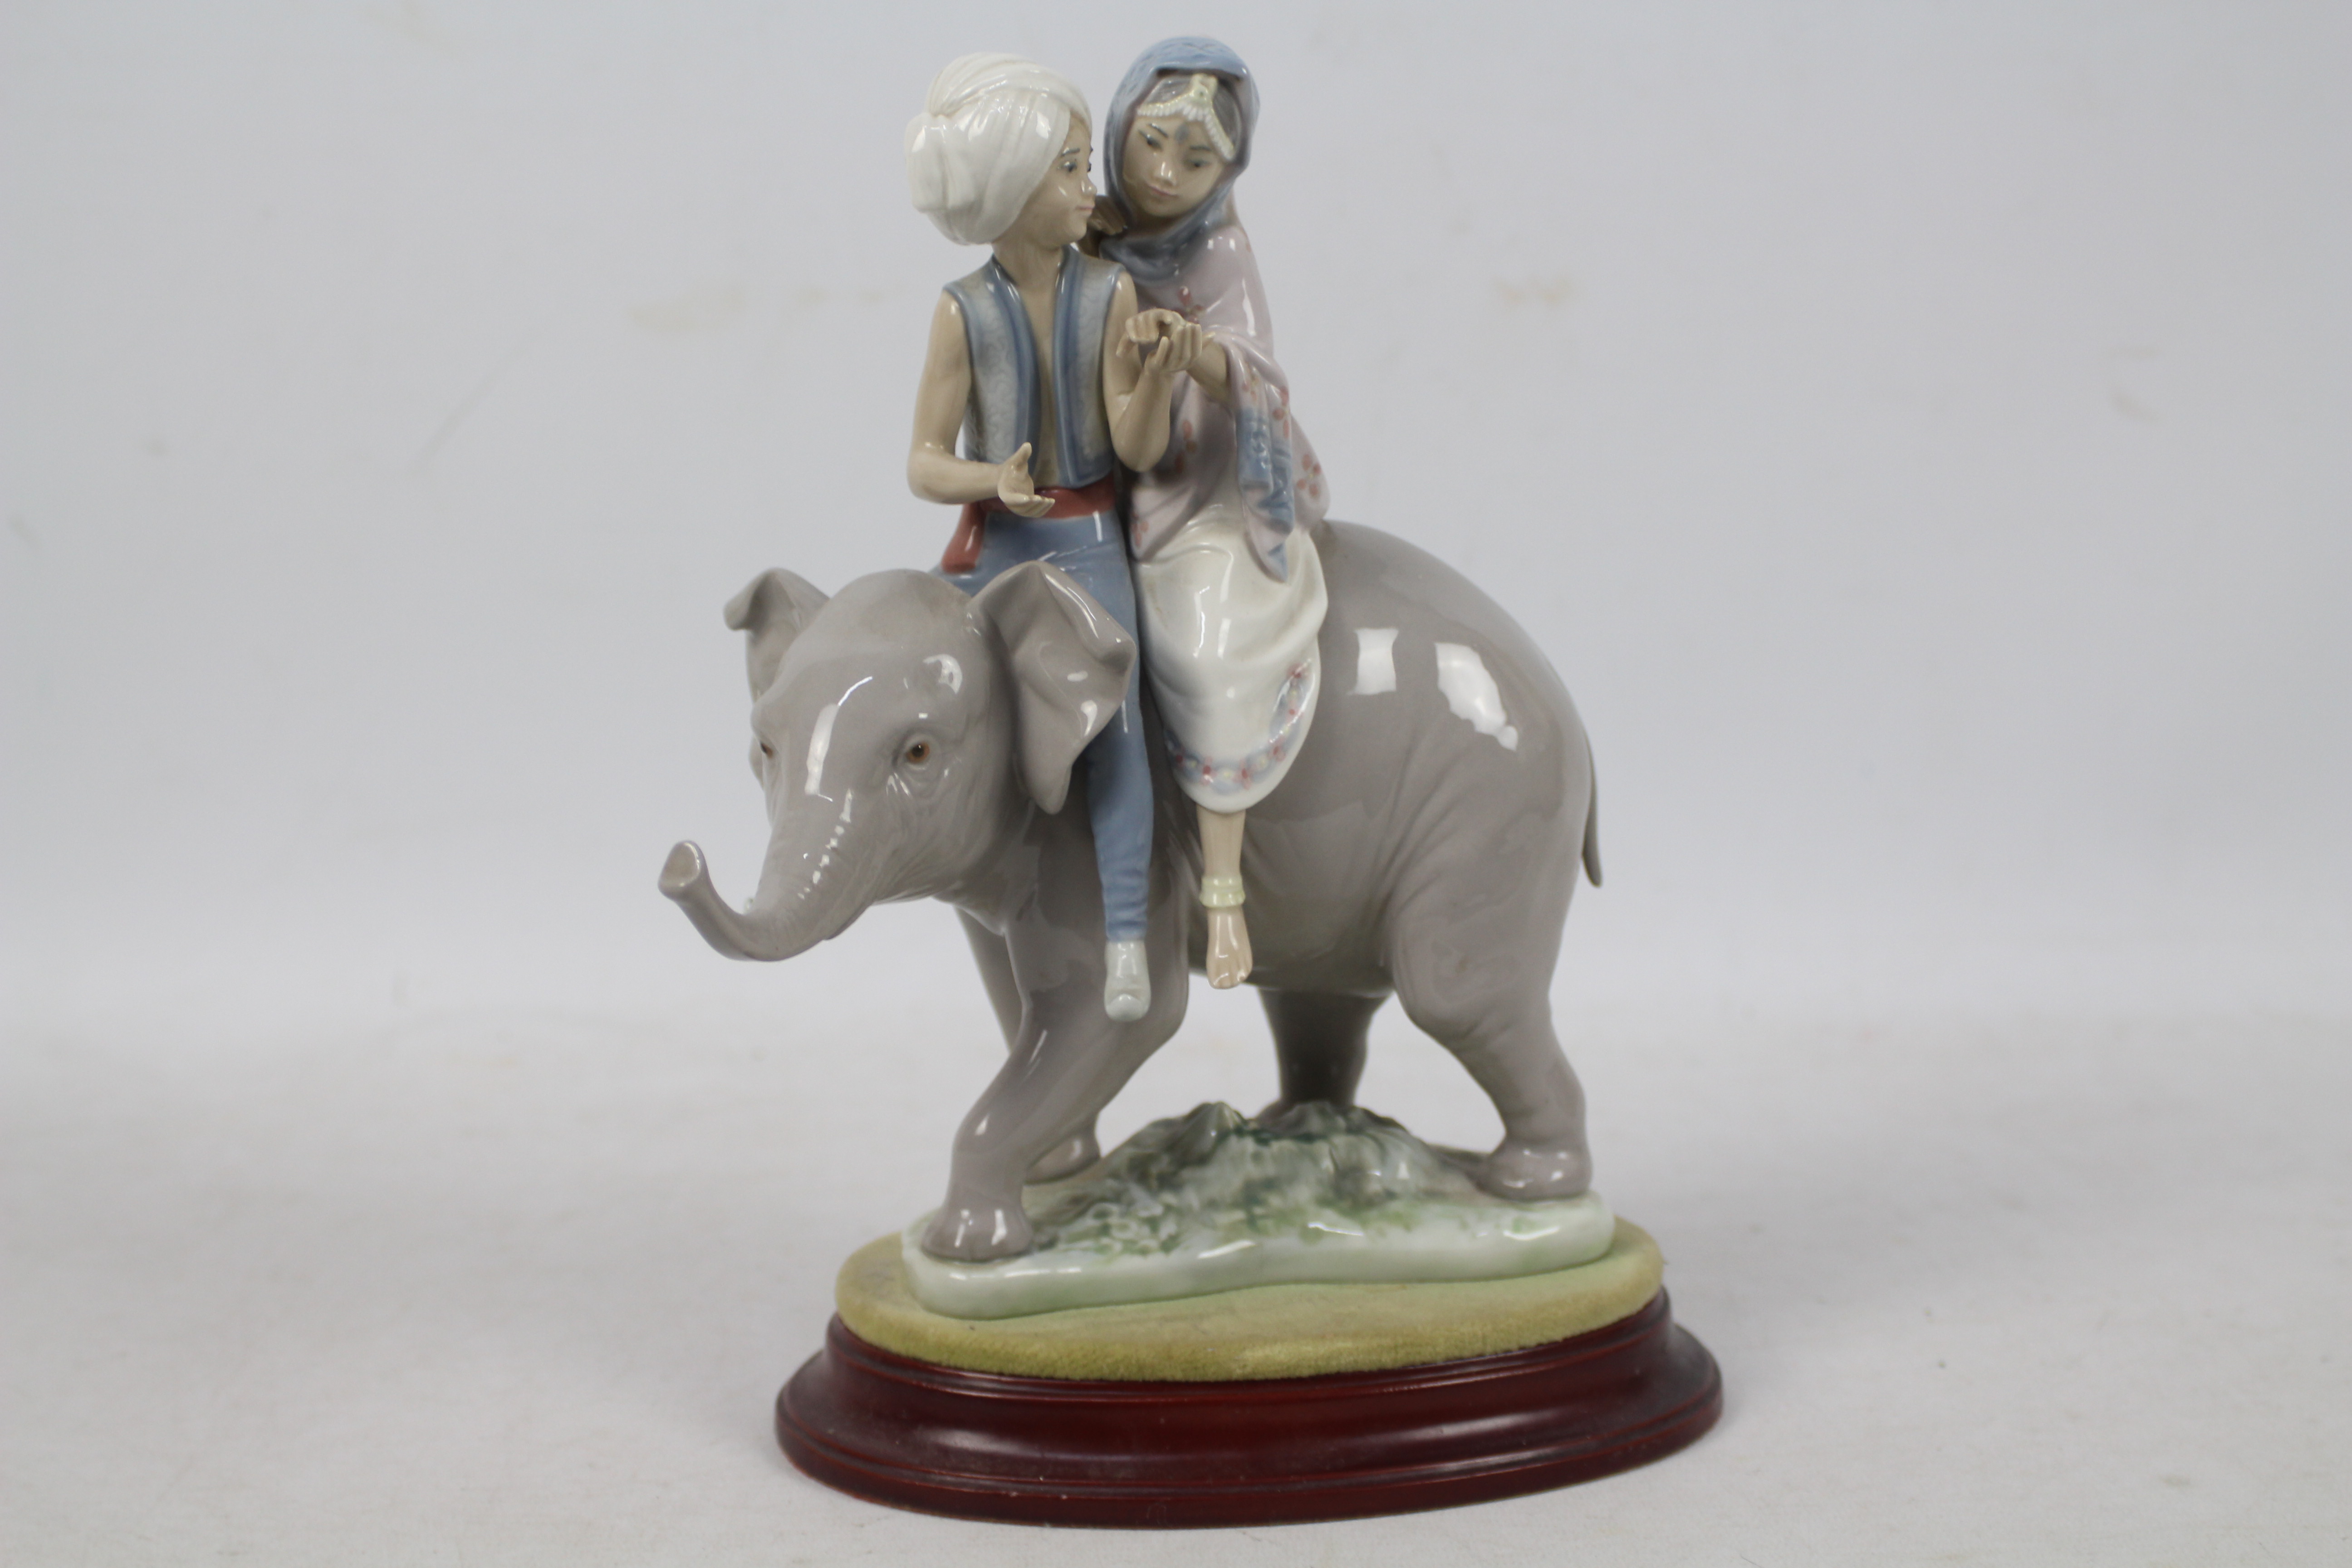 A Lladro figure group # 5352 Hindu Children, approximately 23 cm (h), with wooden display base.